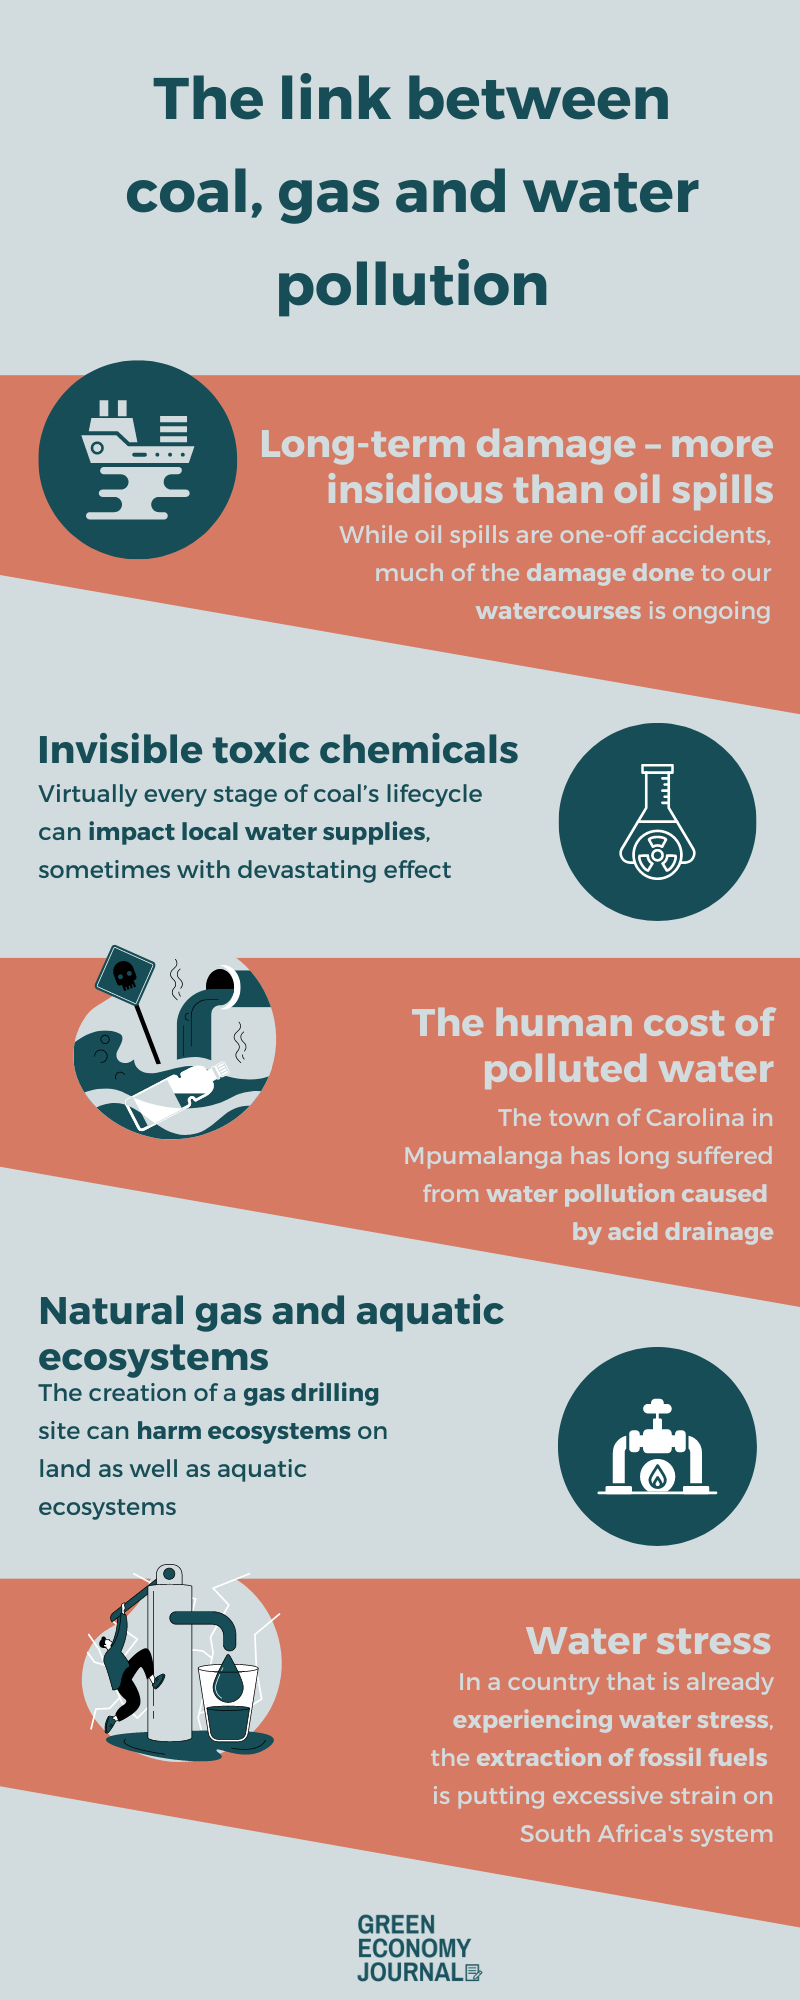 The link between coal, gas and water pollution